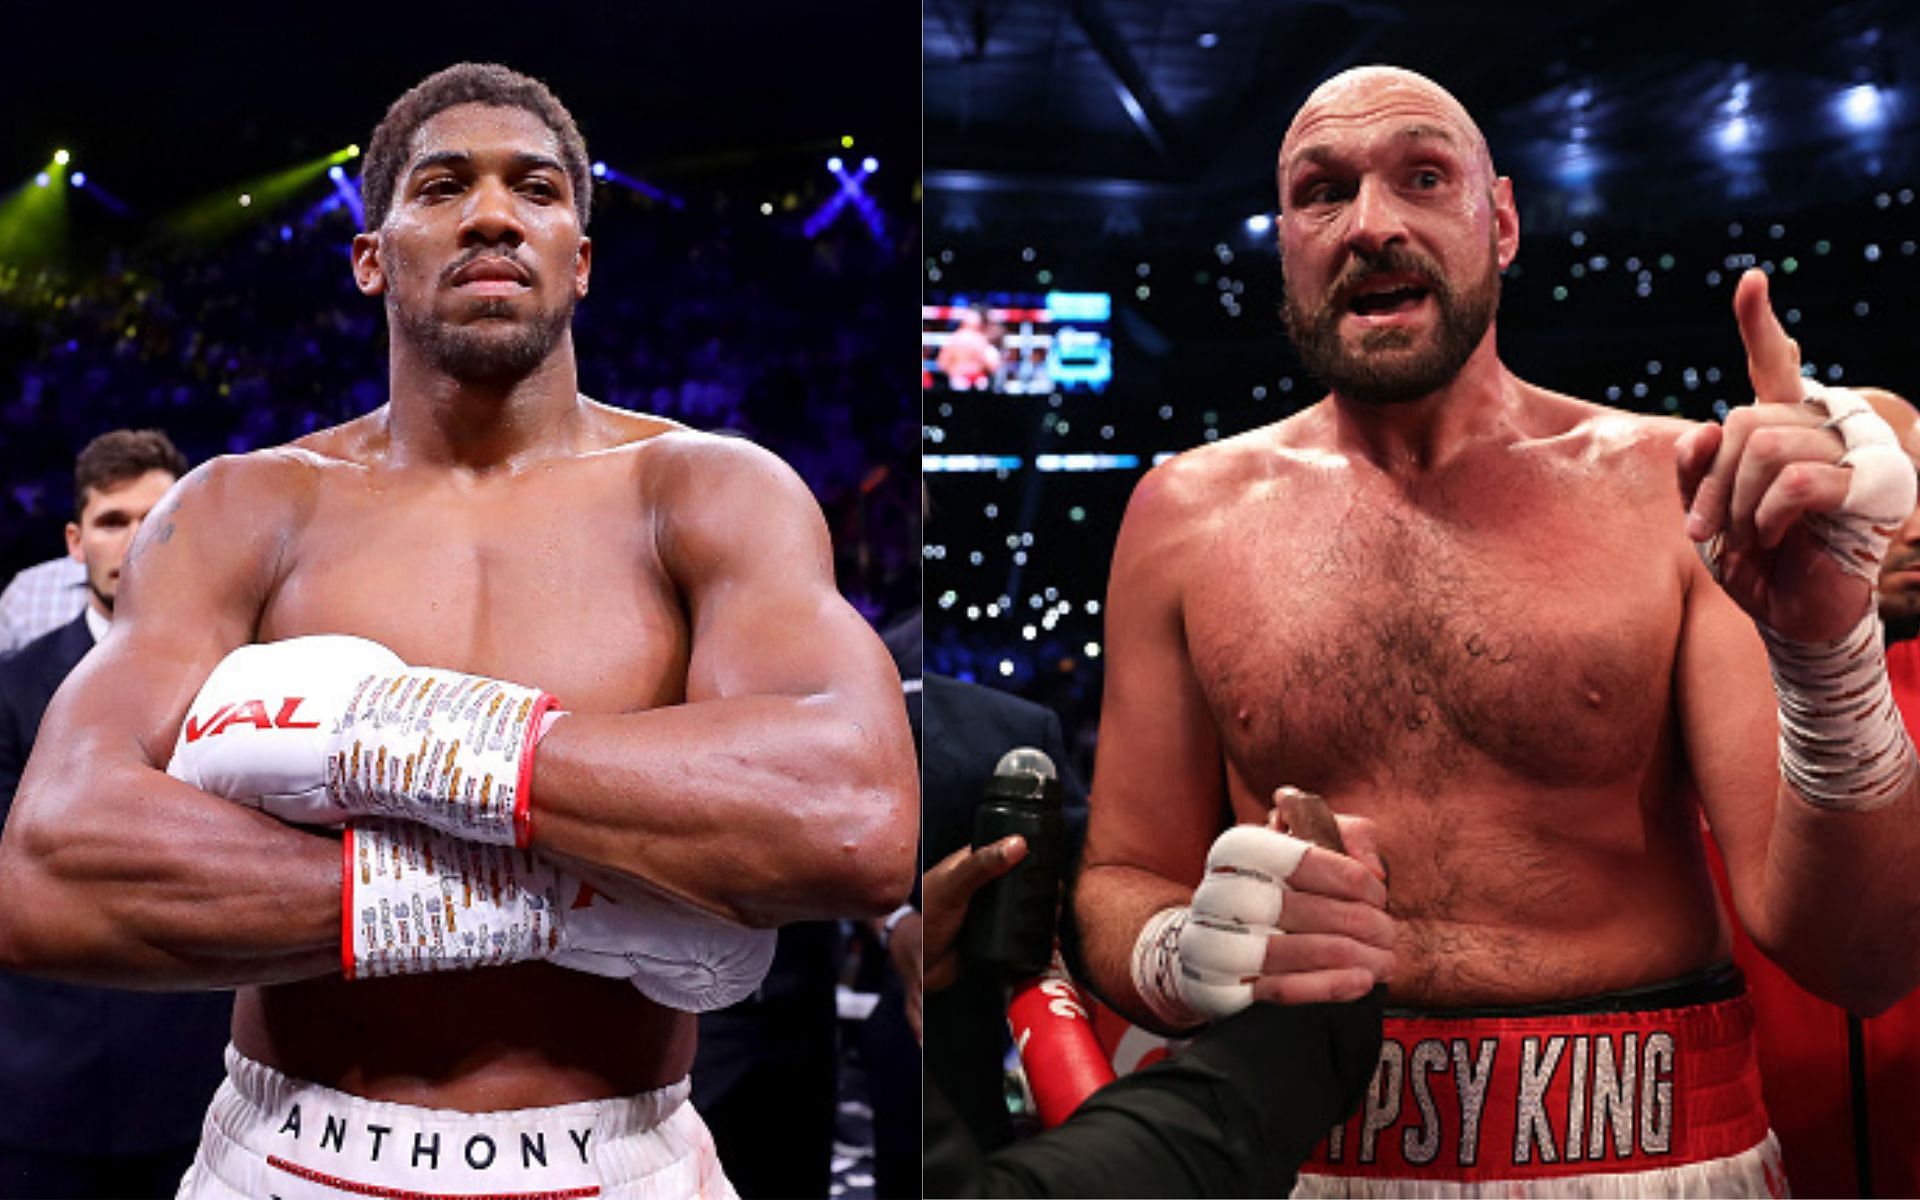 Anthony Joshua (left) and Tyson Fury (right)(Images via Getty)